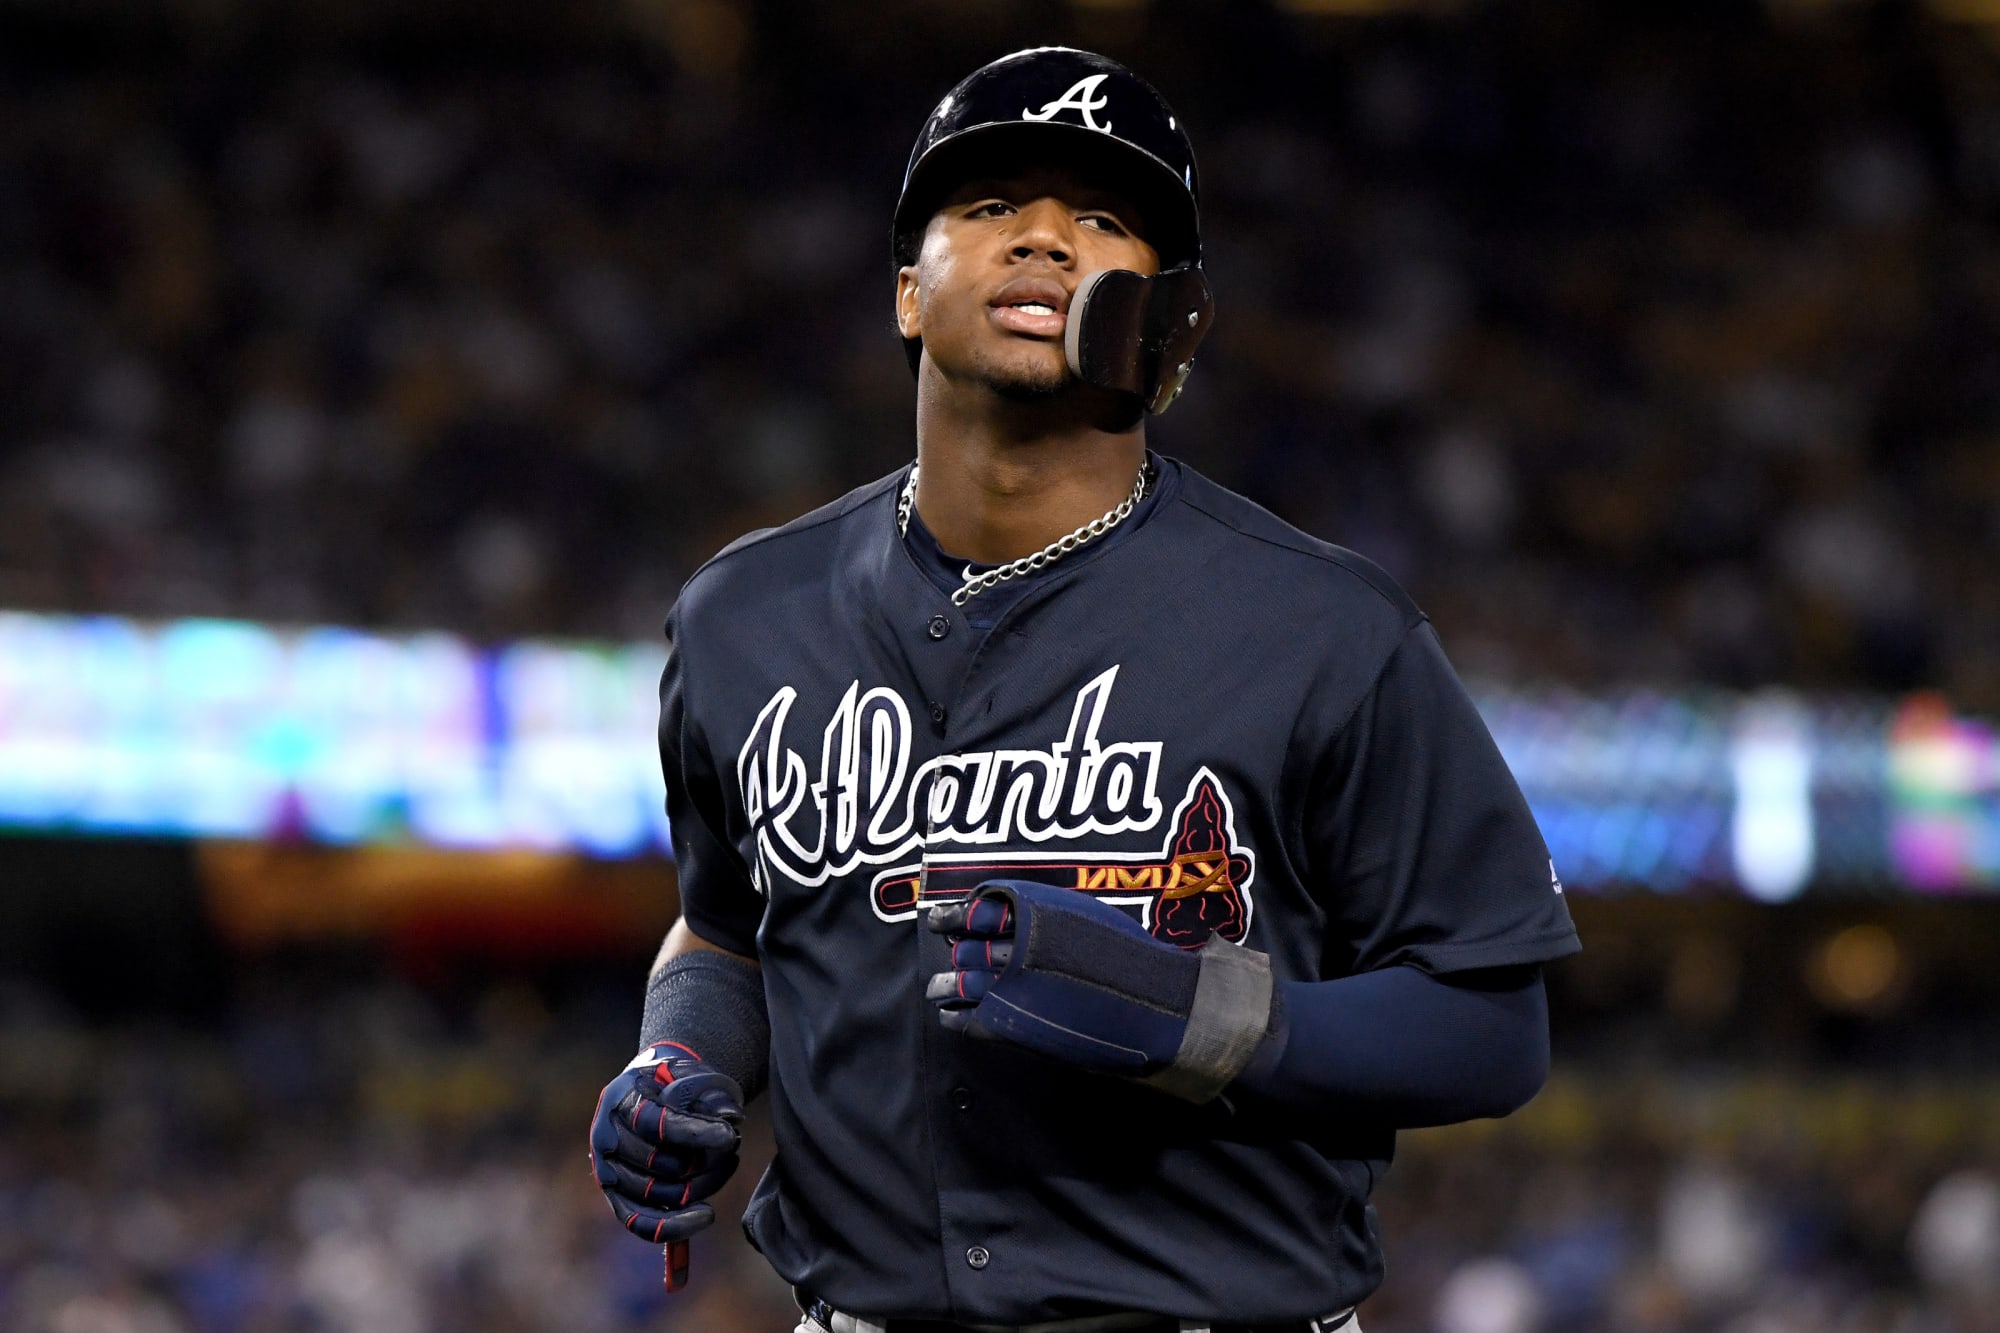 Home Run Derby: Ronald Acuna Jr. startled by fire during introductions